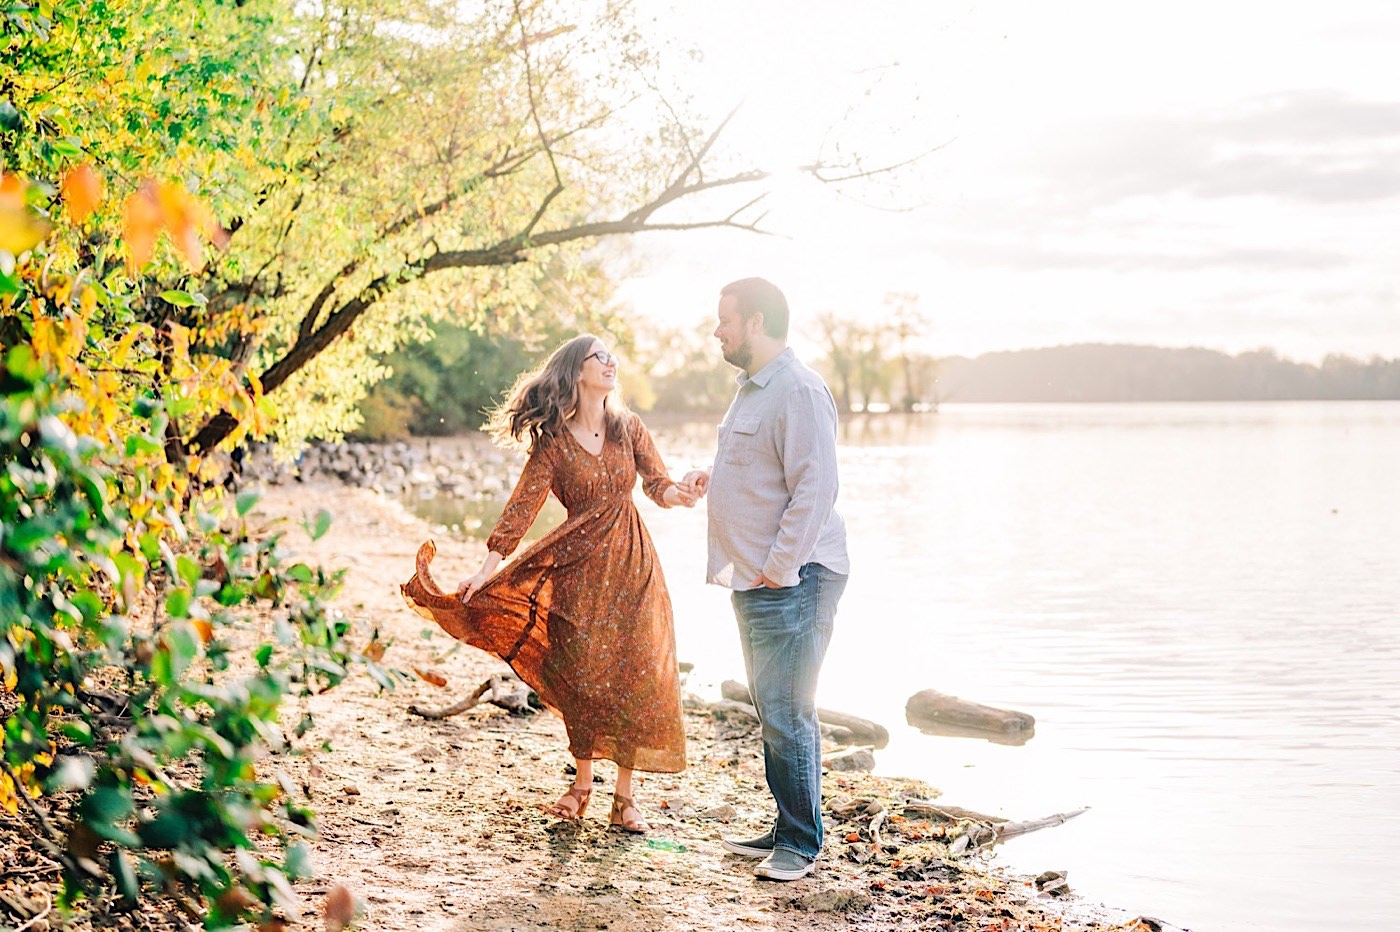 Southern Maryland Wedding Photographer, waterside engagement sessions in Maryland, Kyra Gustwick, Loch Raven Reservoir Engagement Session, Baltimore MD Photographer